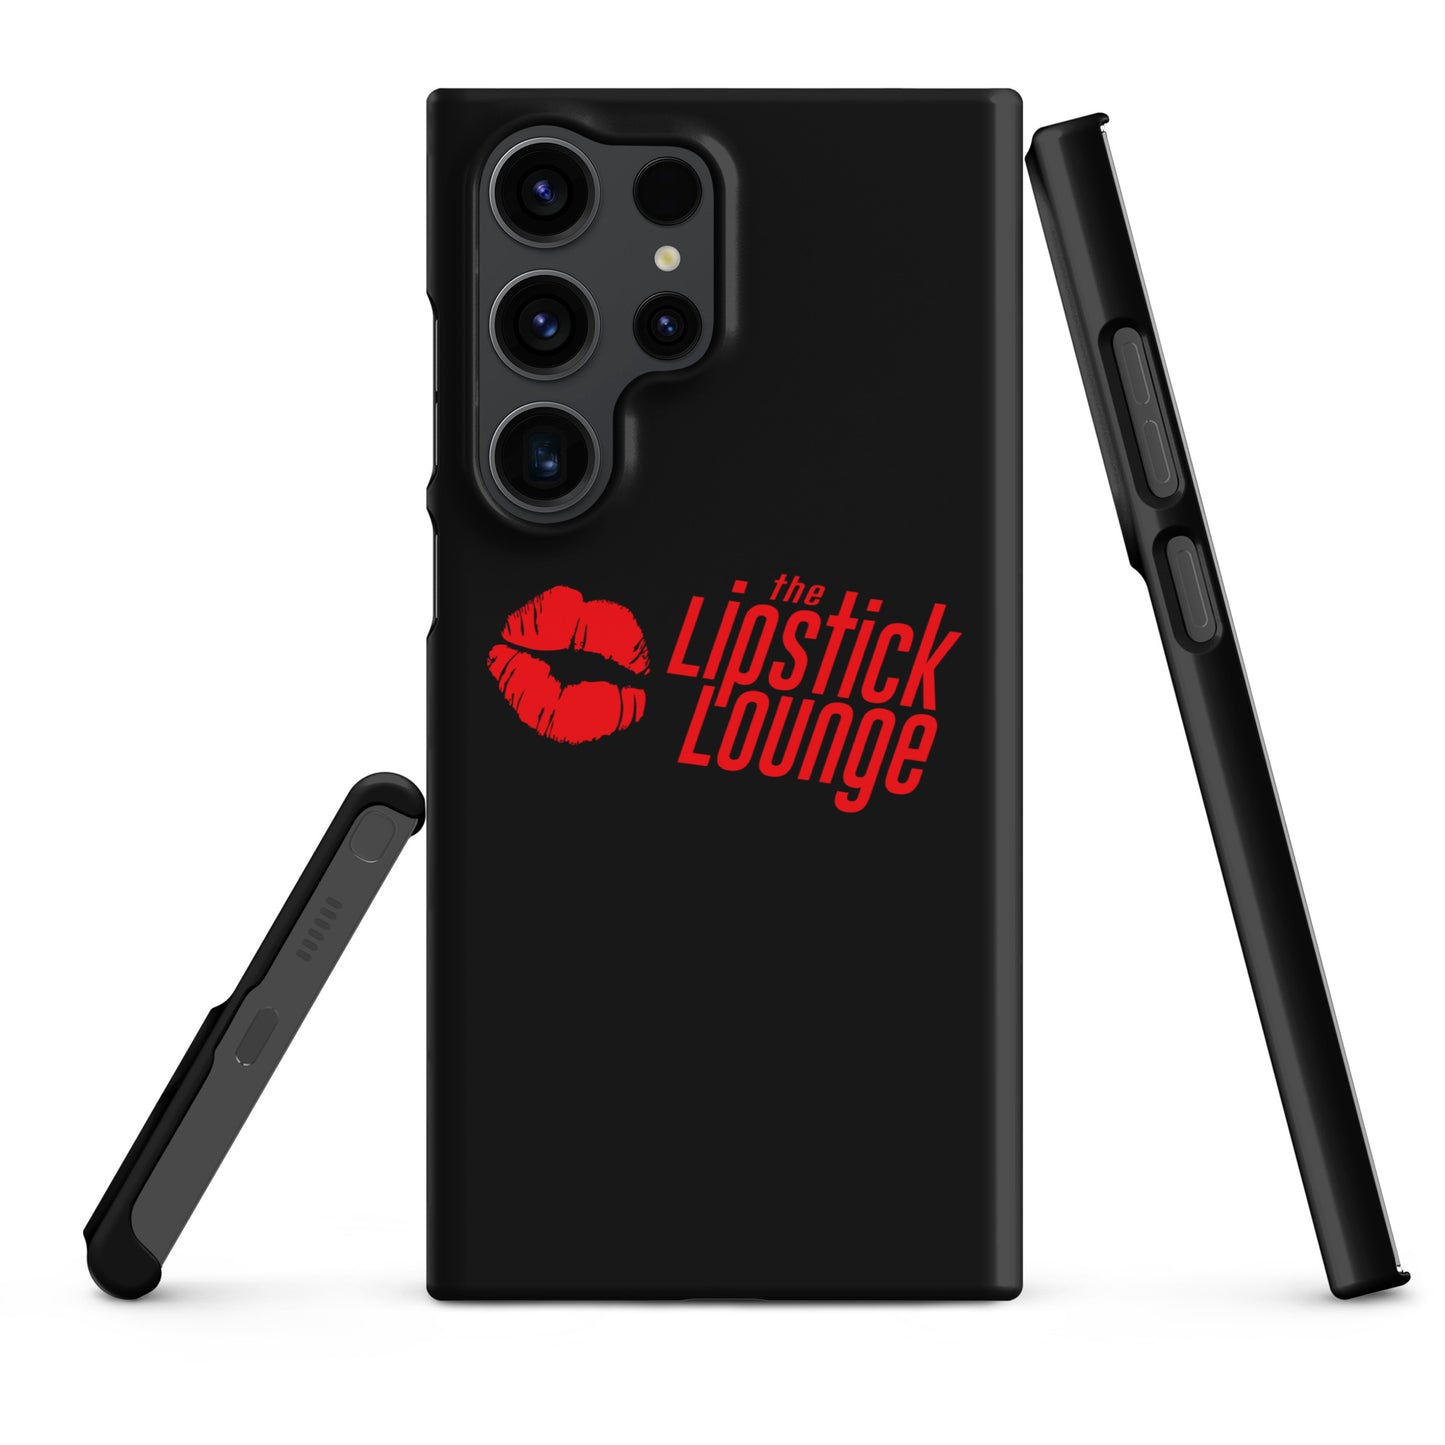 Lipstick Lounge Red Logo Phone Case for Samsung